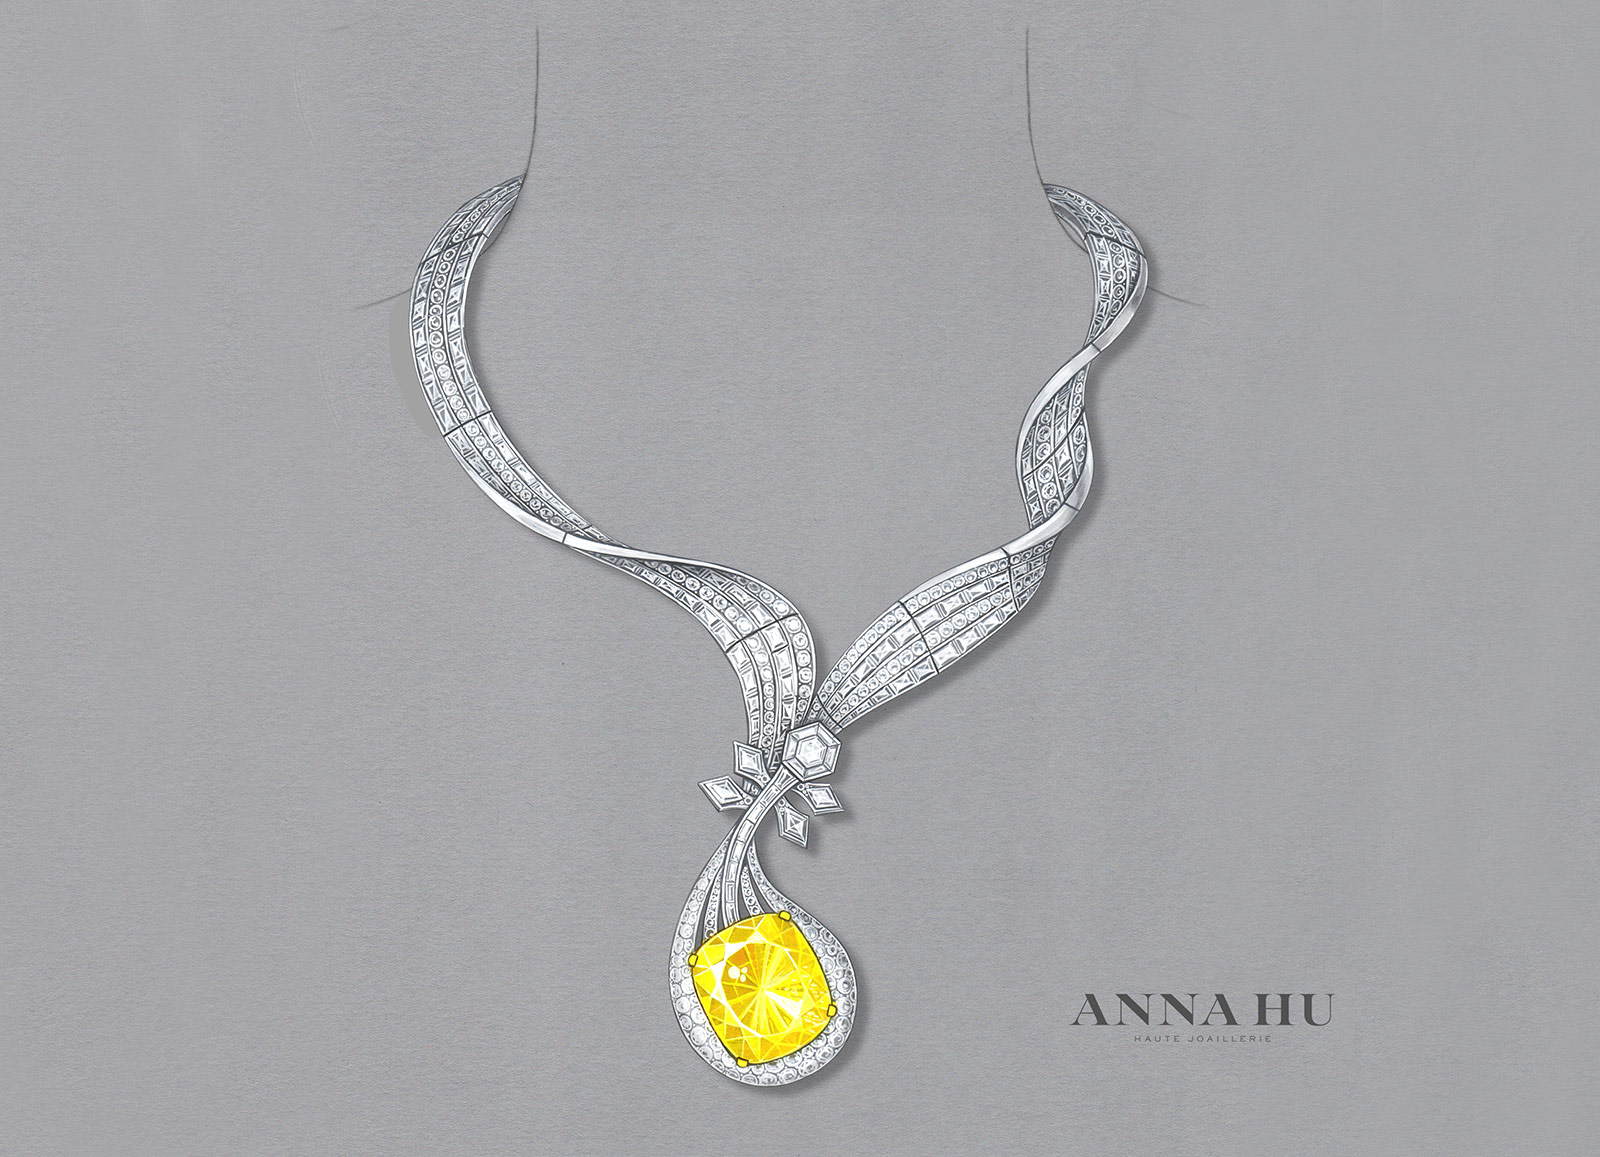 Gouache of Anna Hu’ s 'Dunhuang Pipa' necklace, commissioned by Sotheby’s, with 100.02ct fancy intense yellow diamond, baguette cut diamonds, rhombus diamonds, hexagon step cut diamonds and round brilliant cut diamonds in white and yellow gold